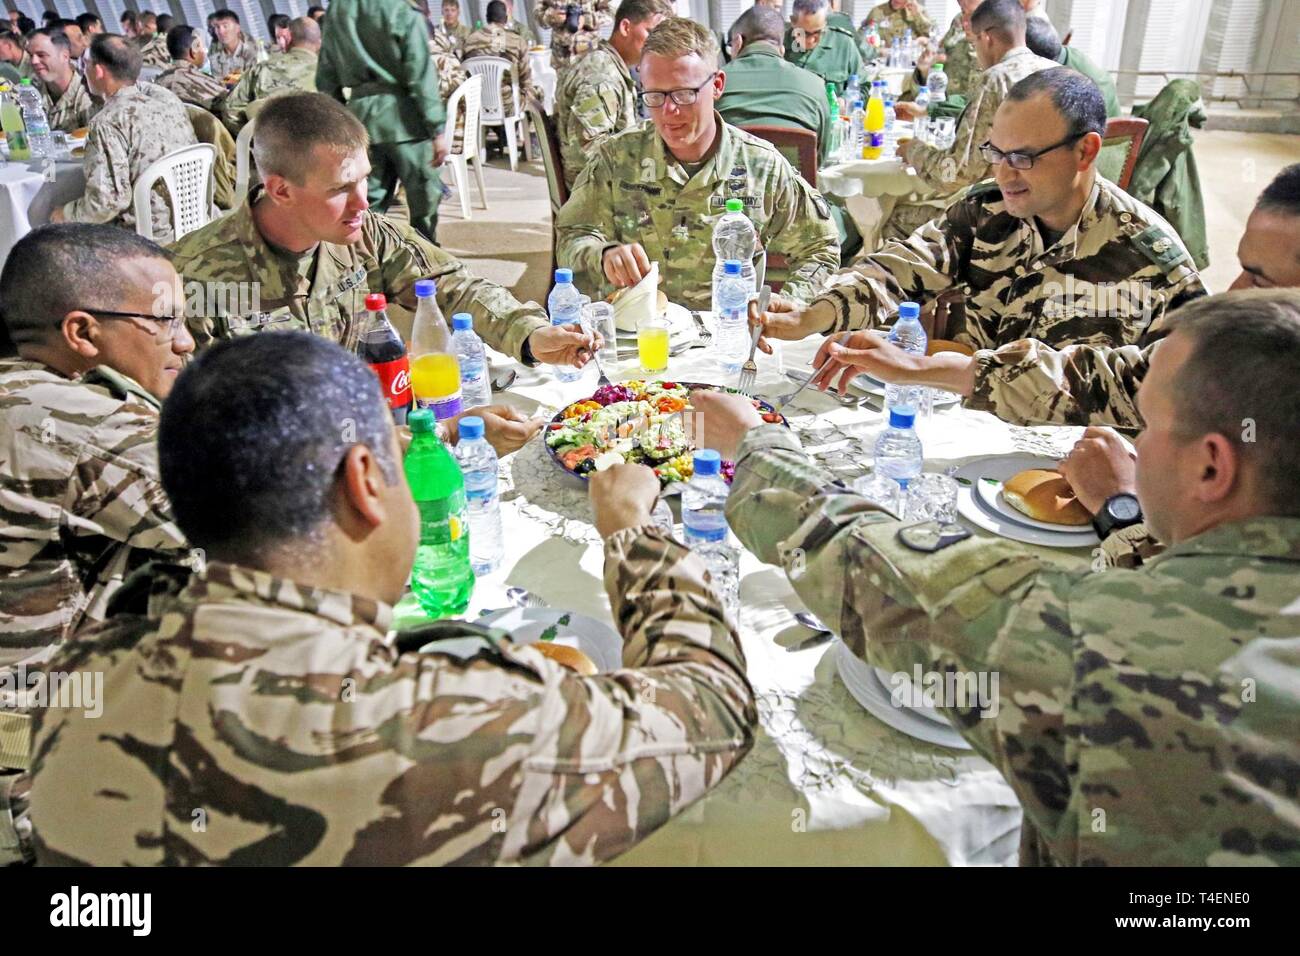 Members of the Royal Moroccan Armed Forces and U.S. military service members participating in the field training exercise in Tan Tan, Morocco, enjoy dinner, conversation and camaraderie at a Moroccan-style dinner hosted by the Moroccan FAR during exercise African Lion 2019, March 31, 2019, . The dinner provided an opportunity for service members from both countries to take a break from the field training exercise to share mutual experiences and reinforce the strong bond between the nations’ militaries. Stock Photo